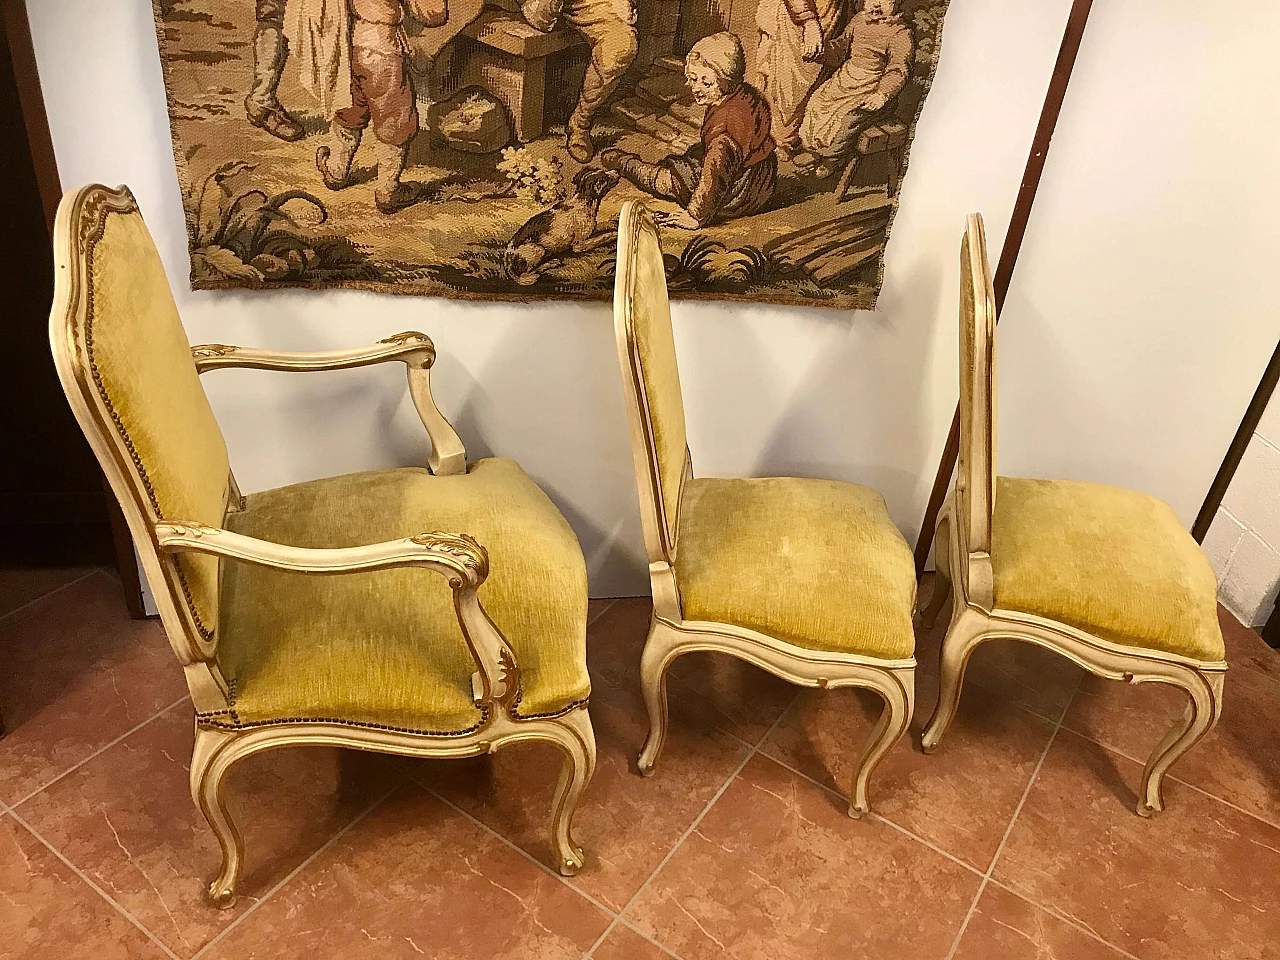 Set of 1 armchair and 2 lacquered and gilded chairs lined with gold-colored velvet, original mid 20th century 1222451